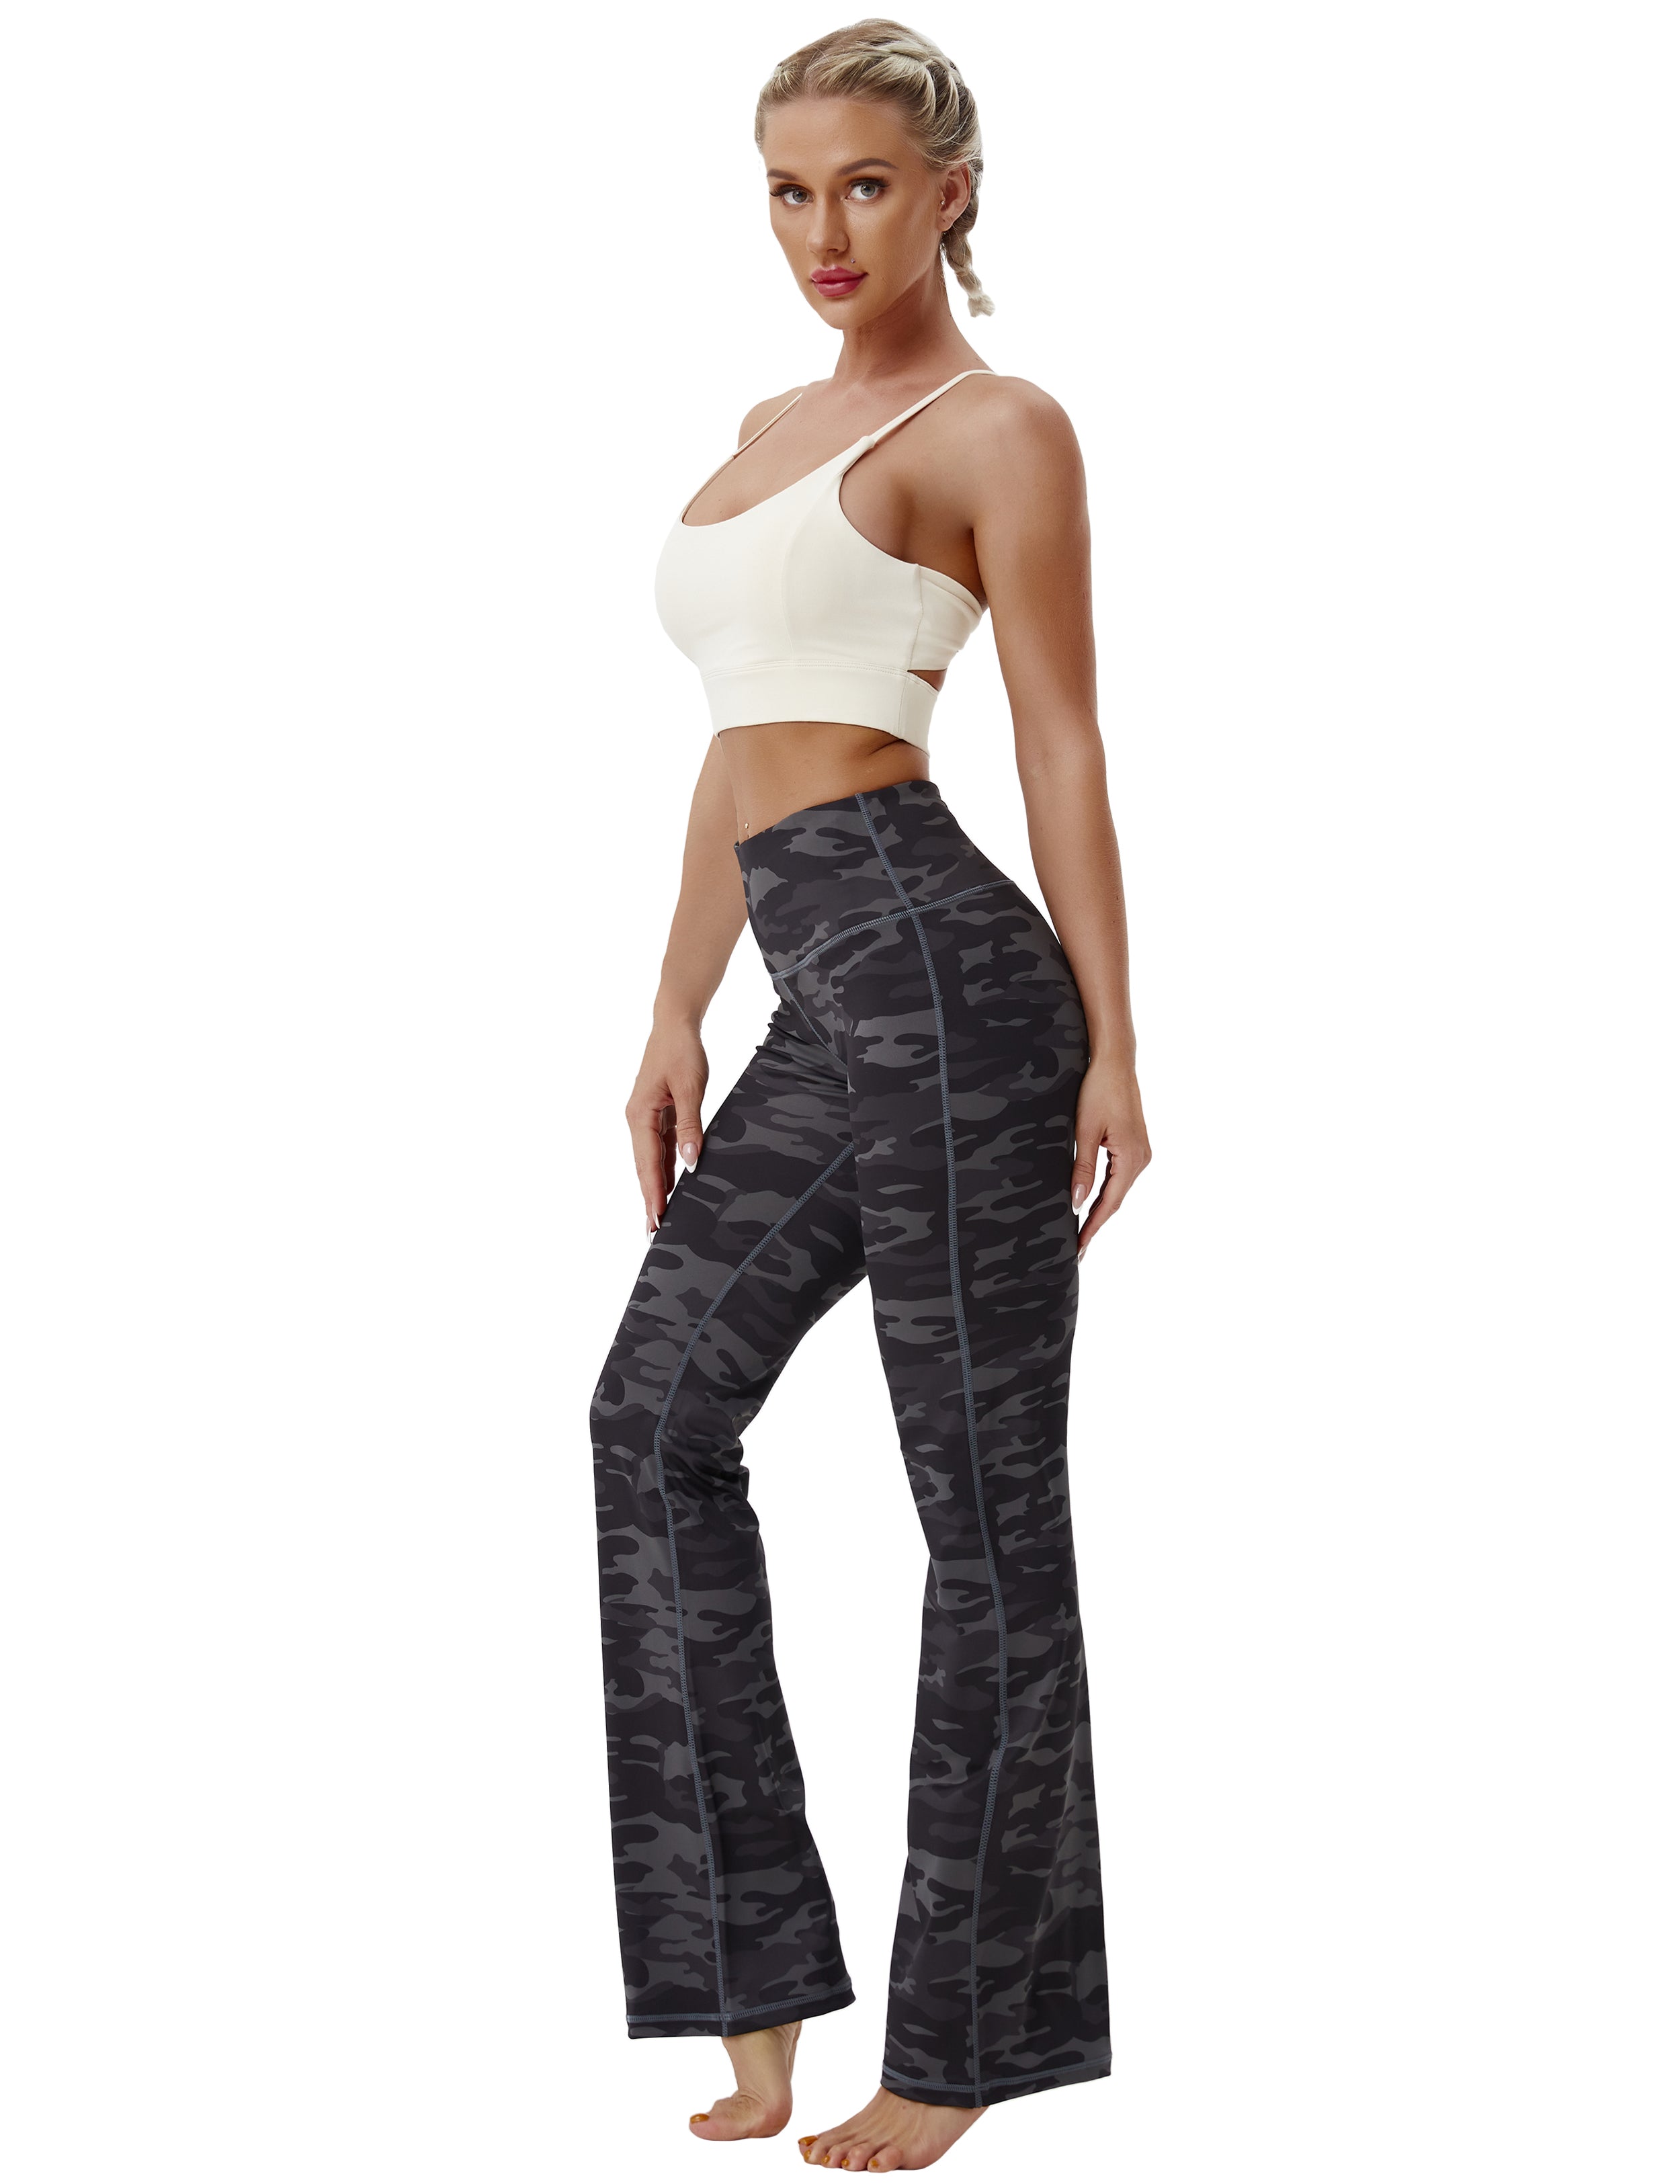 High Waist Printed Bootcut Leggings dimgray camo 78%Polyester/22%Spandex Fabric doesn't attract lint easily 4-way stretch No see-through Moisture-wicking Tummy control Inner pocket Five lengths